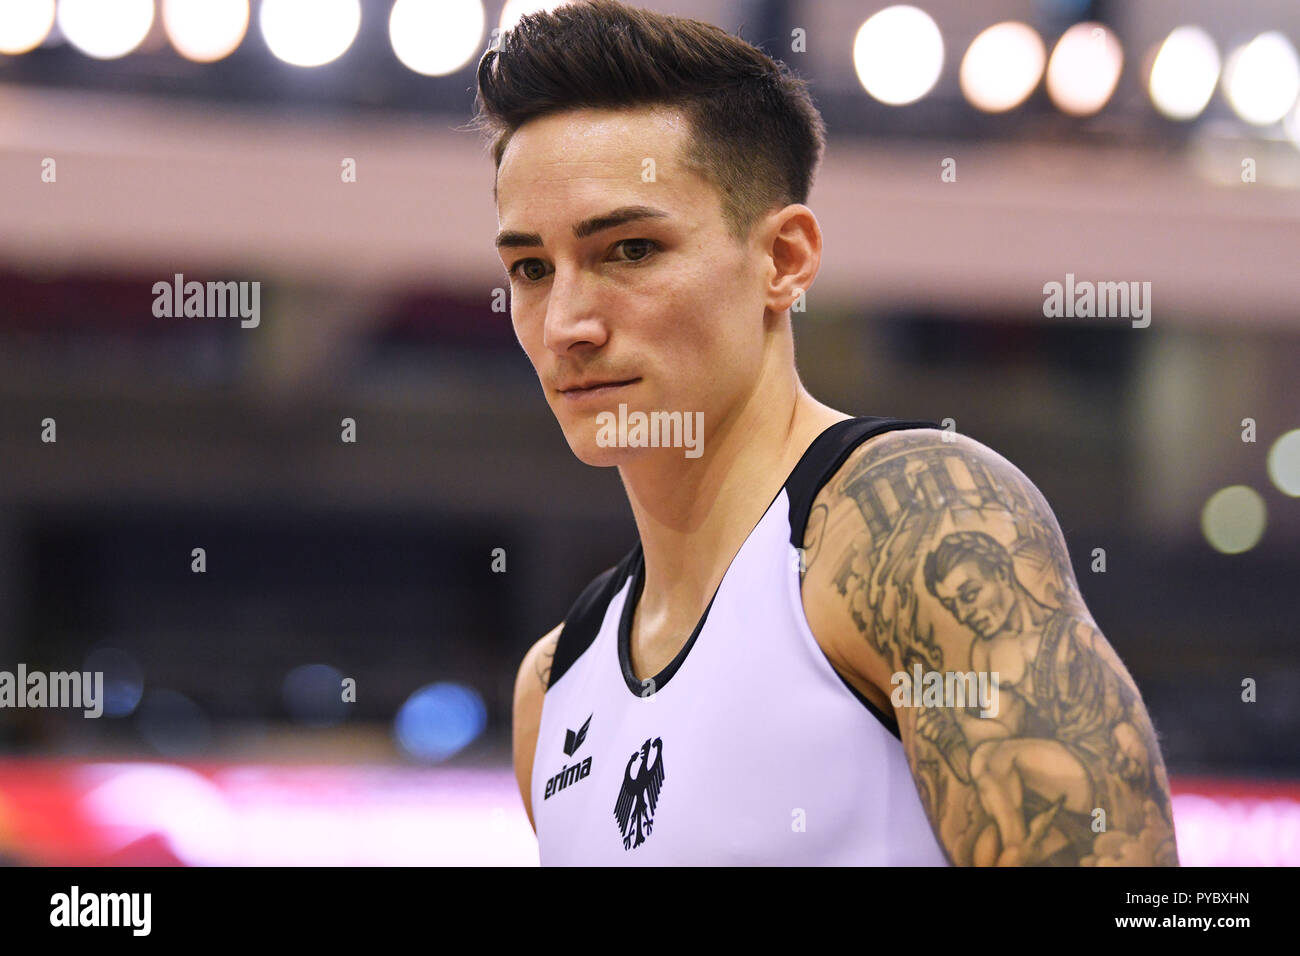 Marcel Nguyen (GER),  October 26, 2018 - Artistic Gymnastics : The 2018 Artistic Gymnastics World Championships, Men's team Qualification Vault at Aspire Dome in Doha, Qatar. (Photo by MATSUO.K/AFLO SPORT) Stock Photo